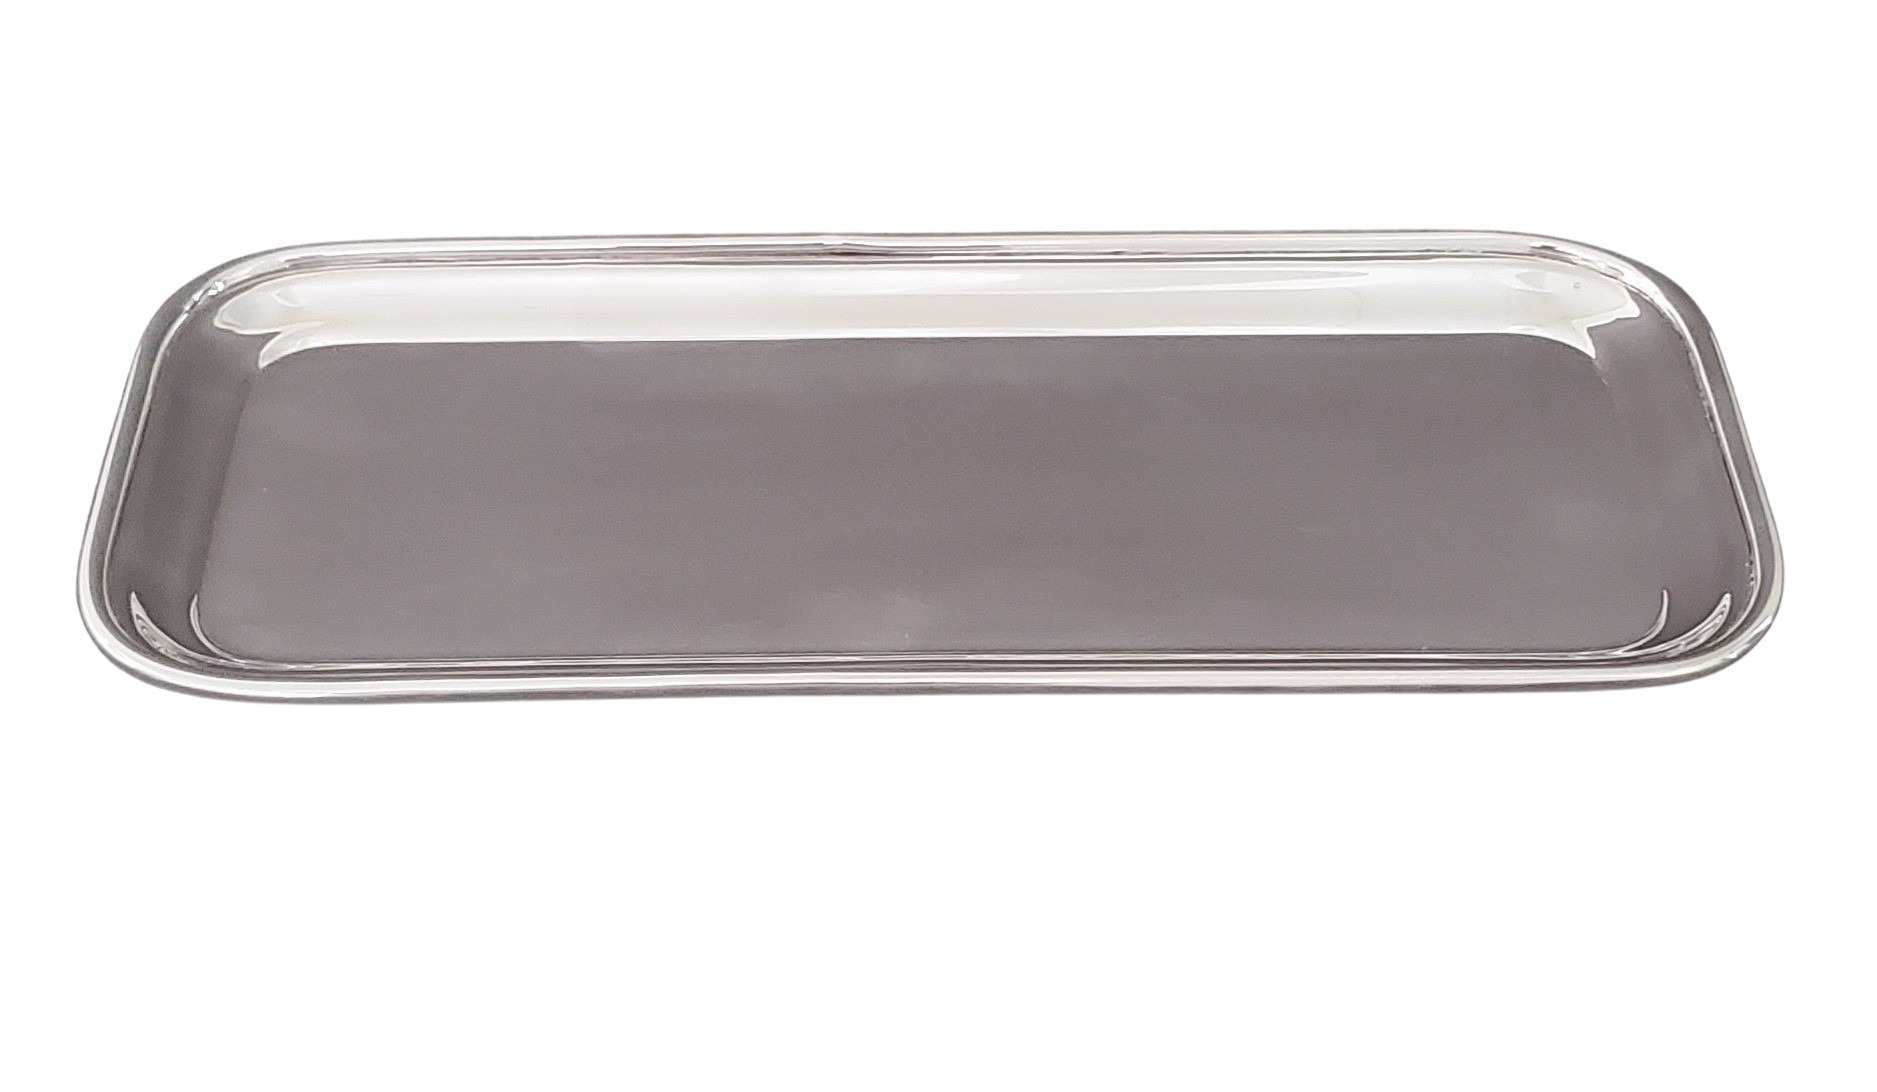 Stainless Steel Flat Instrument Tray